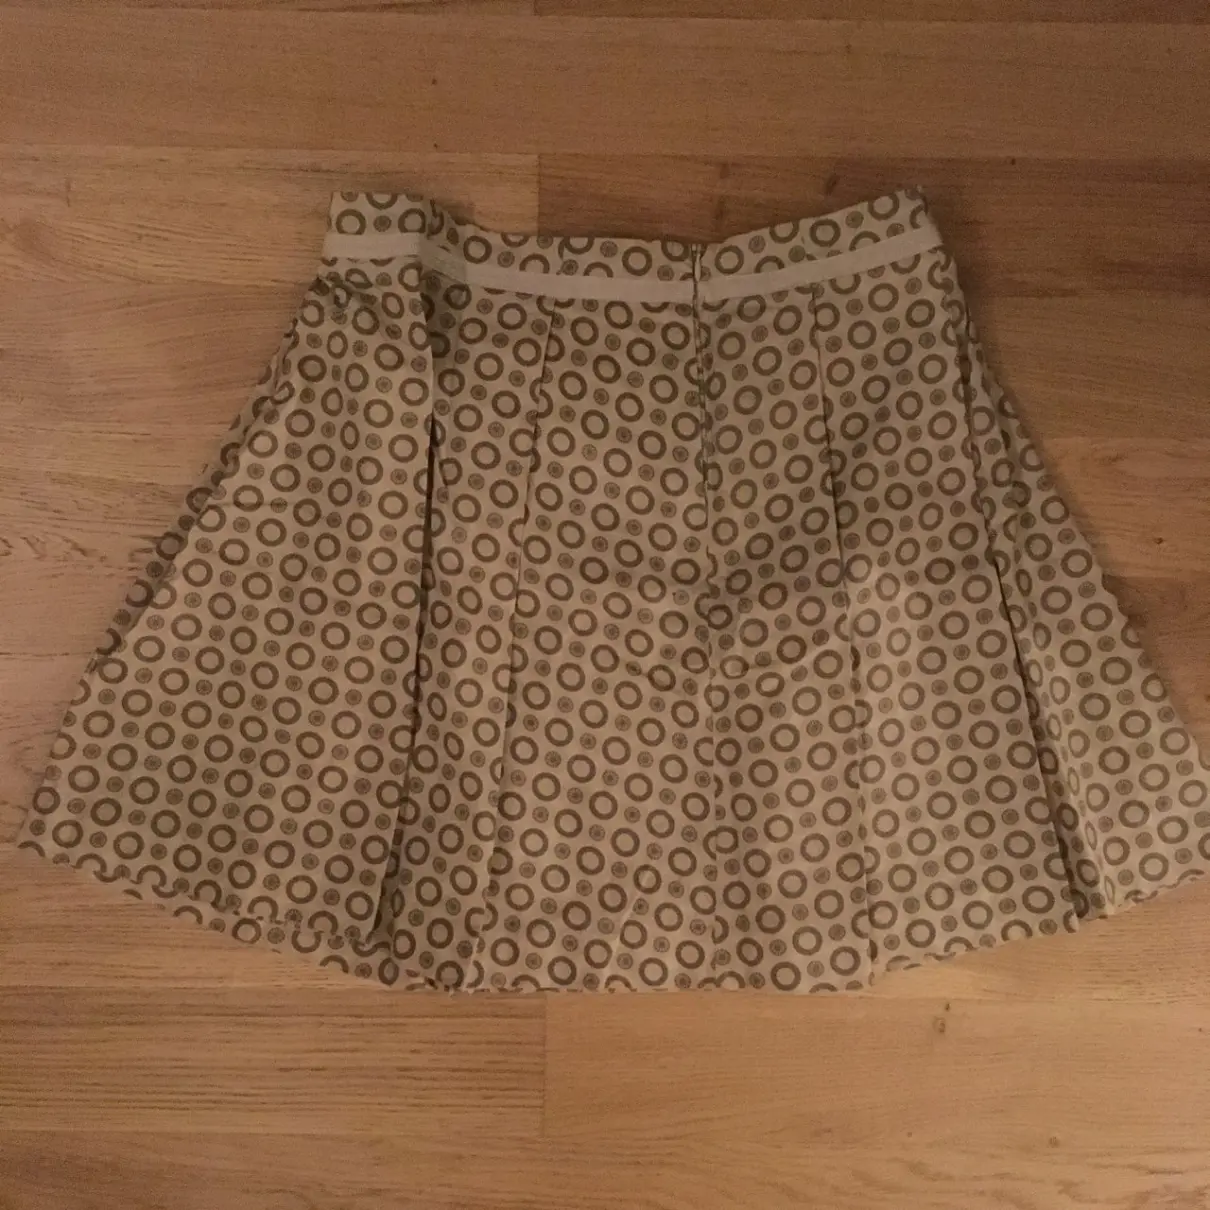 See by Chloé Mid-length skirt for sale